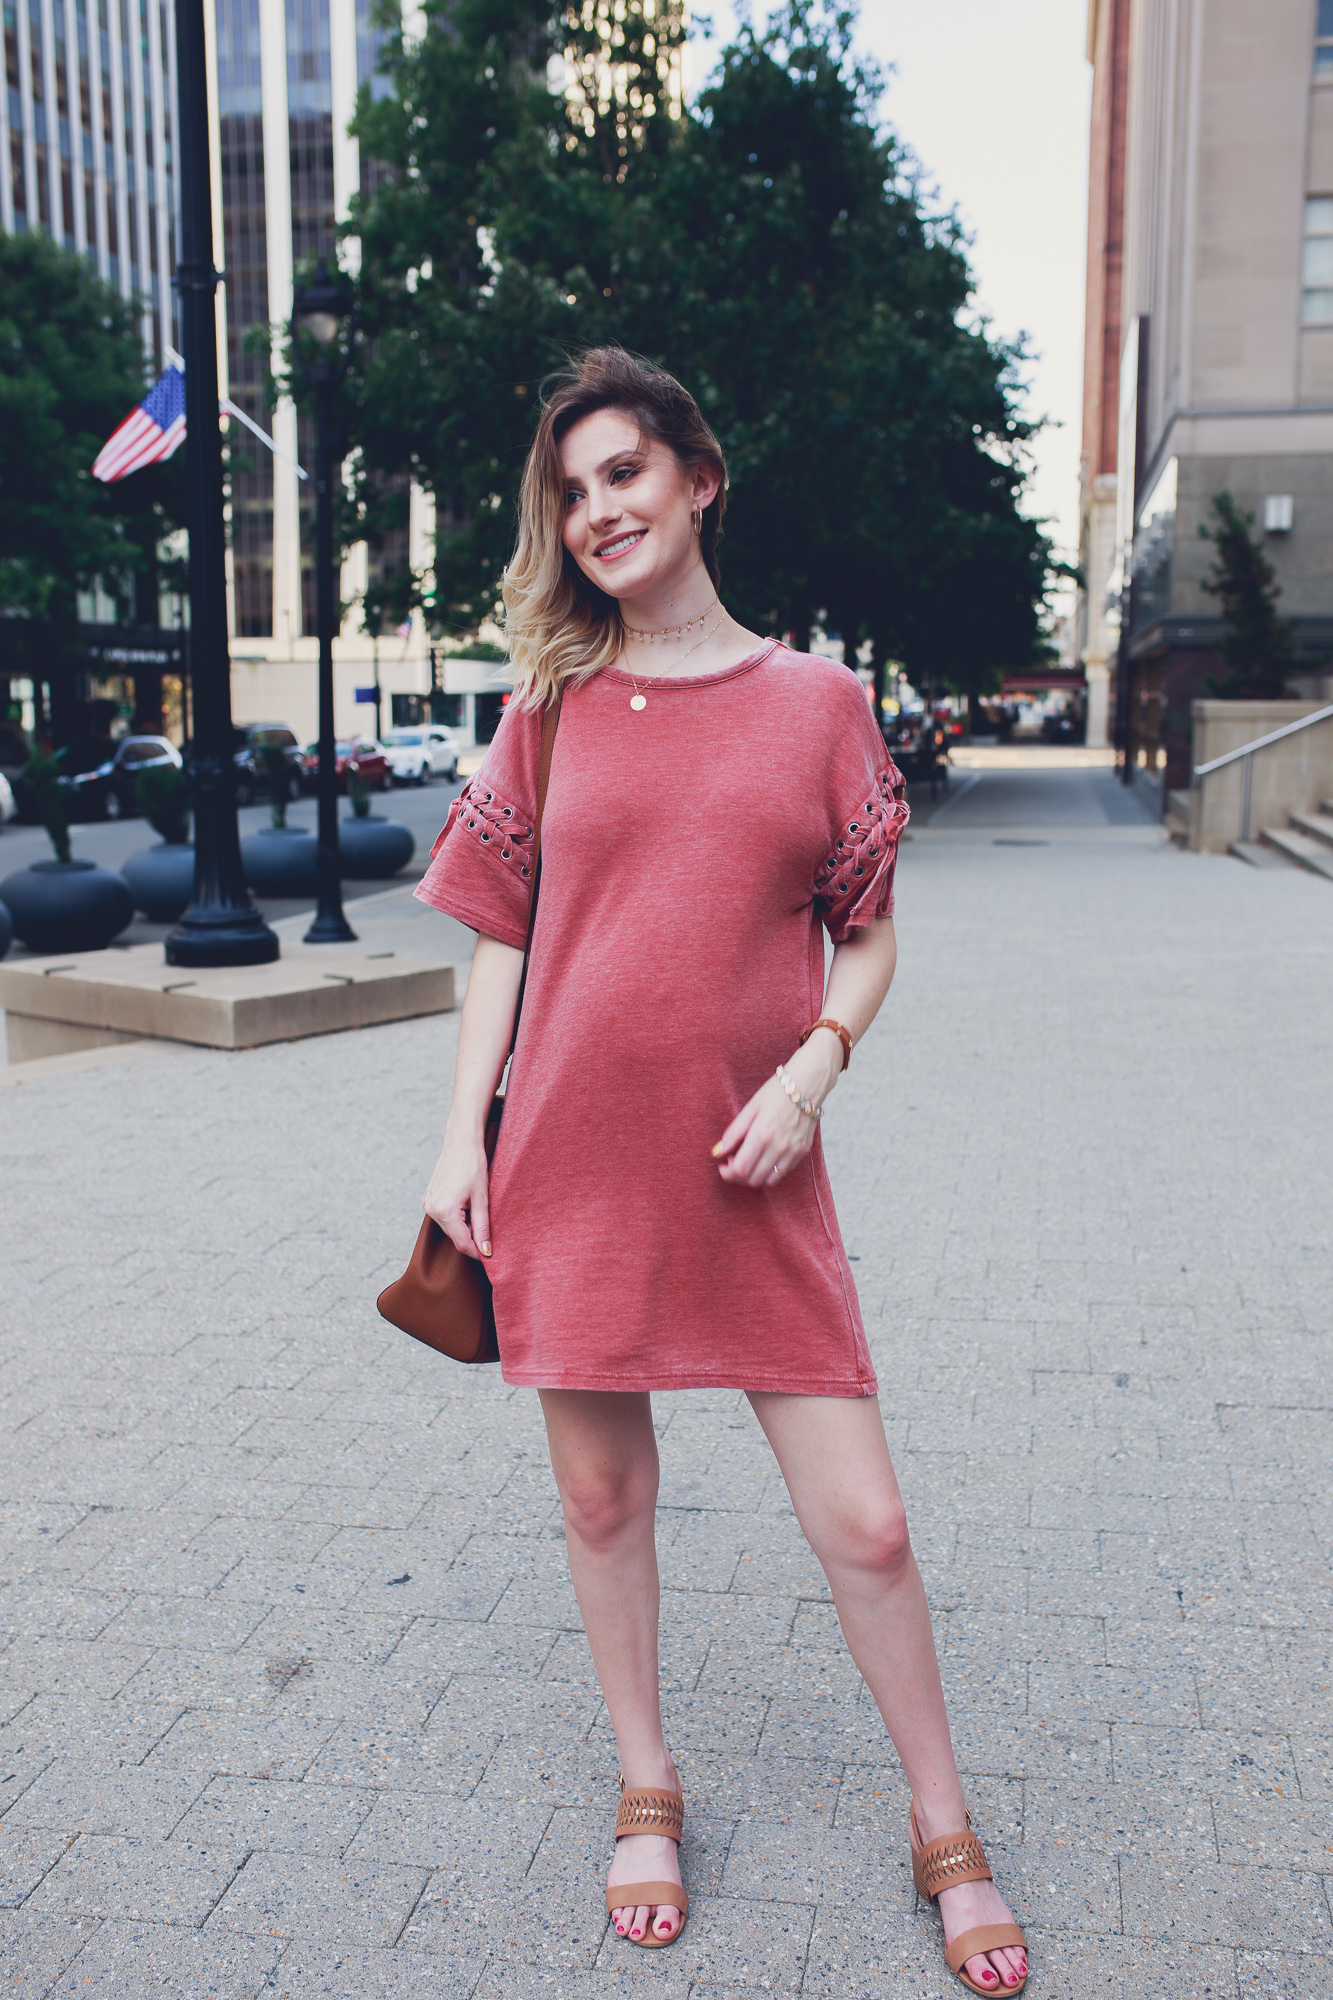 Lifestyle Fashion and beauty blogger Jessica Linn from Linn Style wearing a Forever21 sweater dress and Michael Kors purse in downtown Raleigh North Carolina. Non-maternity maternity outfits.